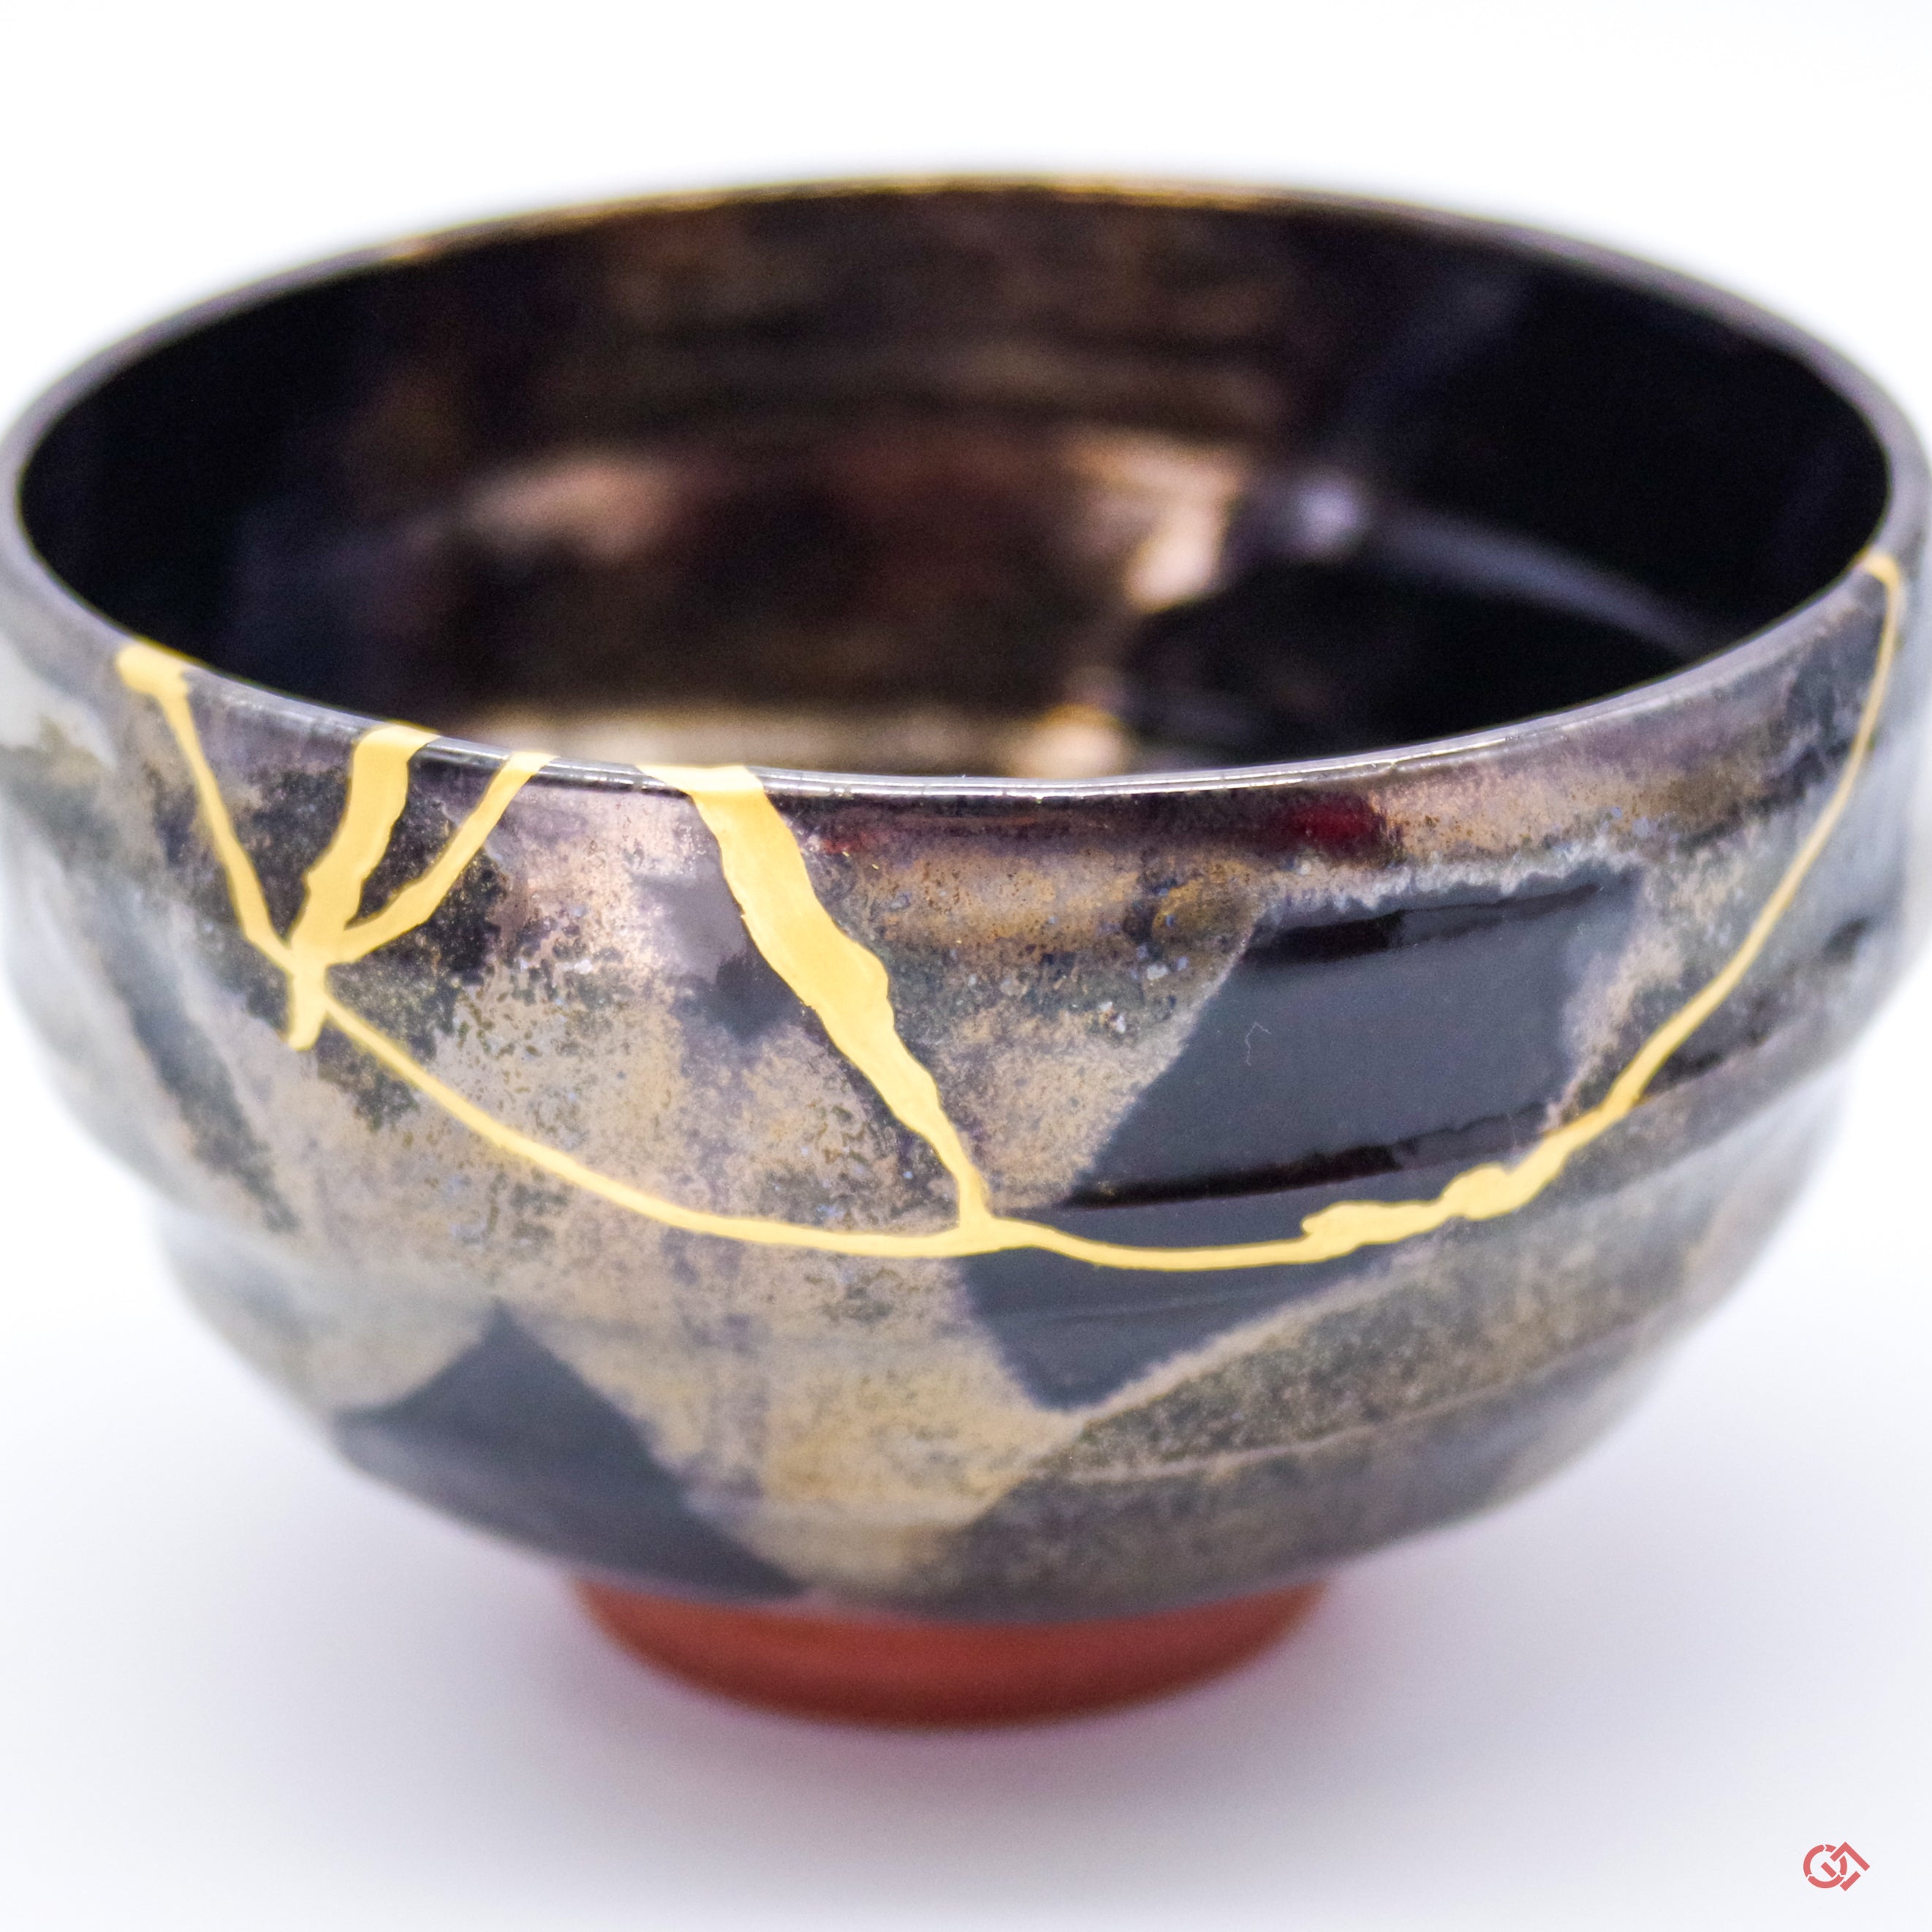 Youkoya Authentic 24k Kintsugi Bowl - Hand-Crafted in Shigaraki, Japan -  Real 24k Gold - Perfect for Traditional Matcha Tea - One of a Kind Piece of